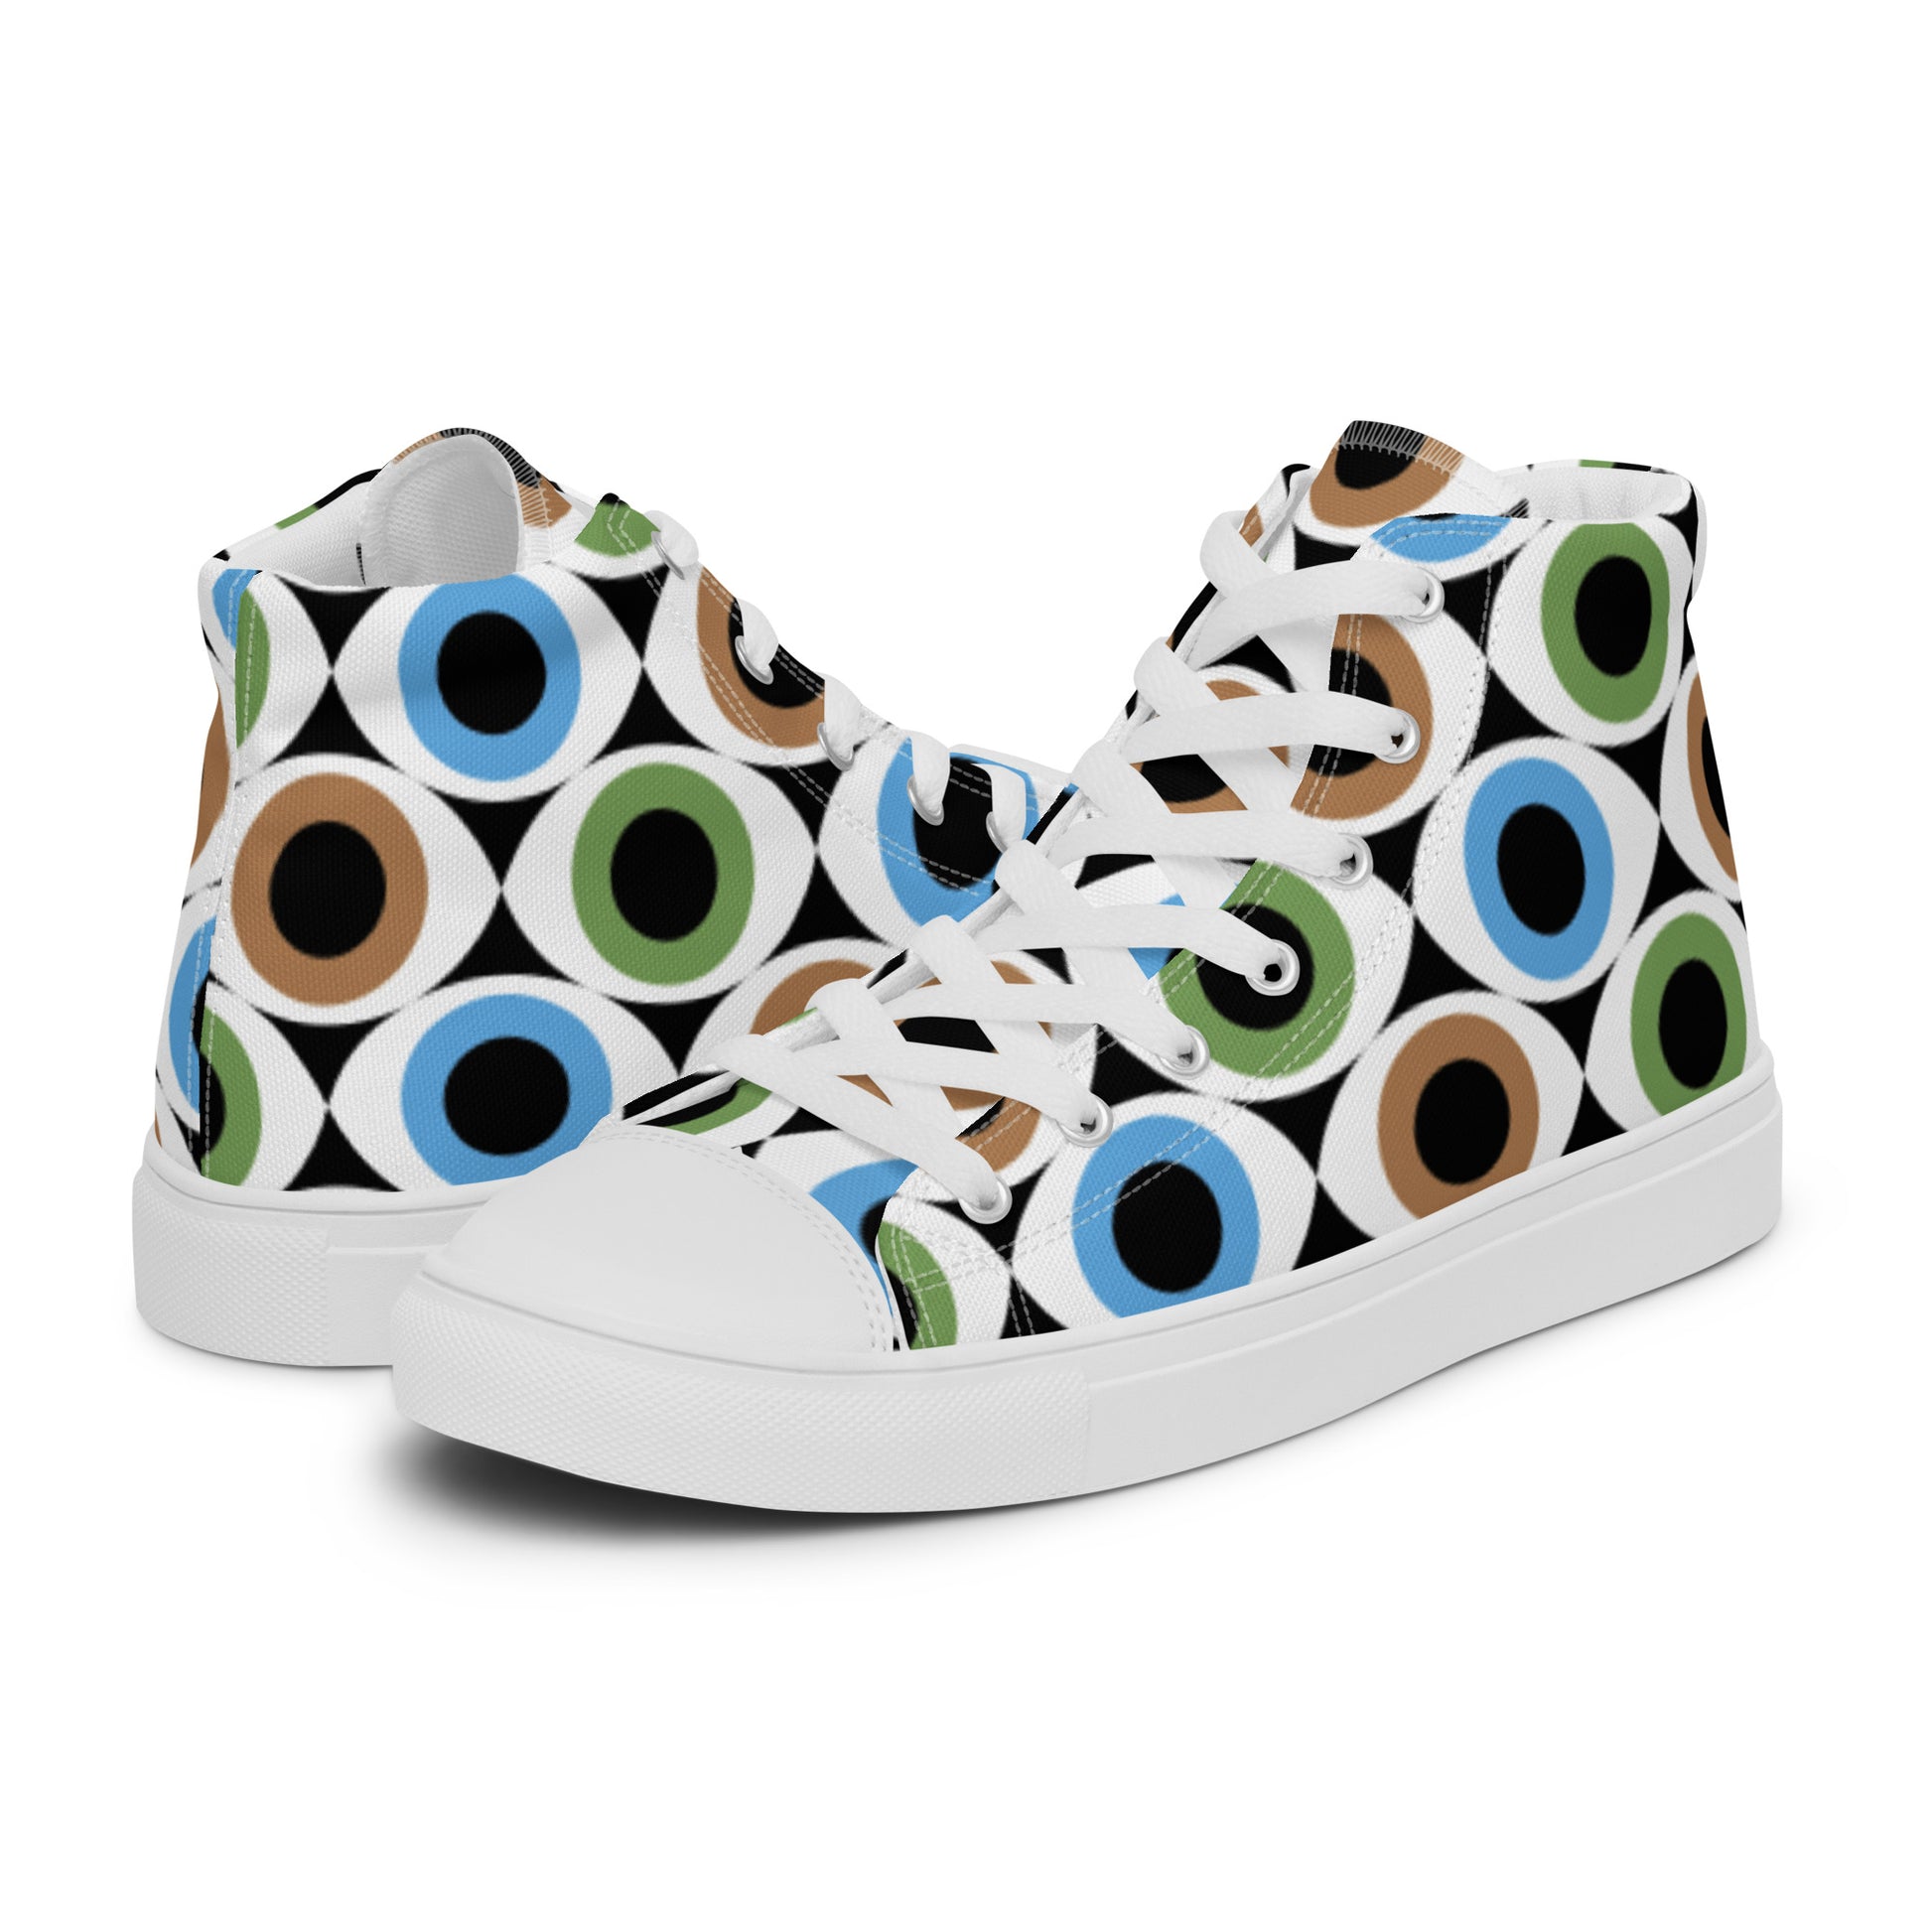 Eye See - Women’s high top canvas shoes Womens High Top Shoes